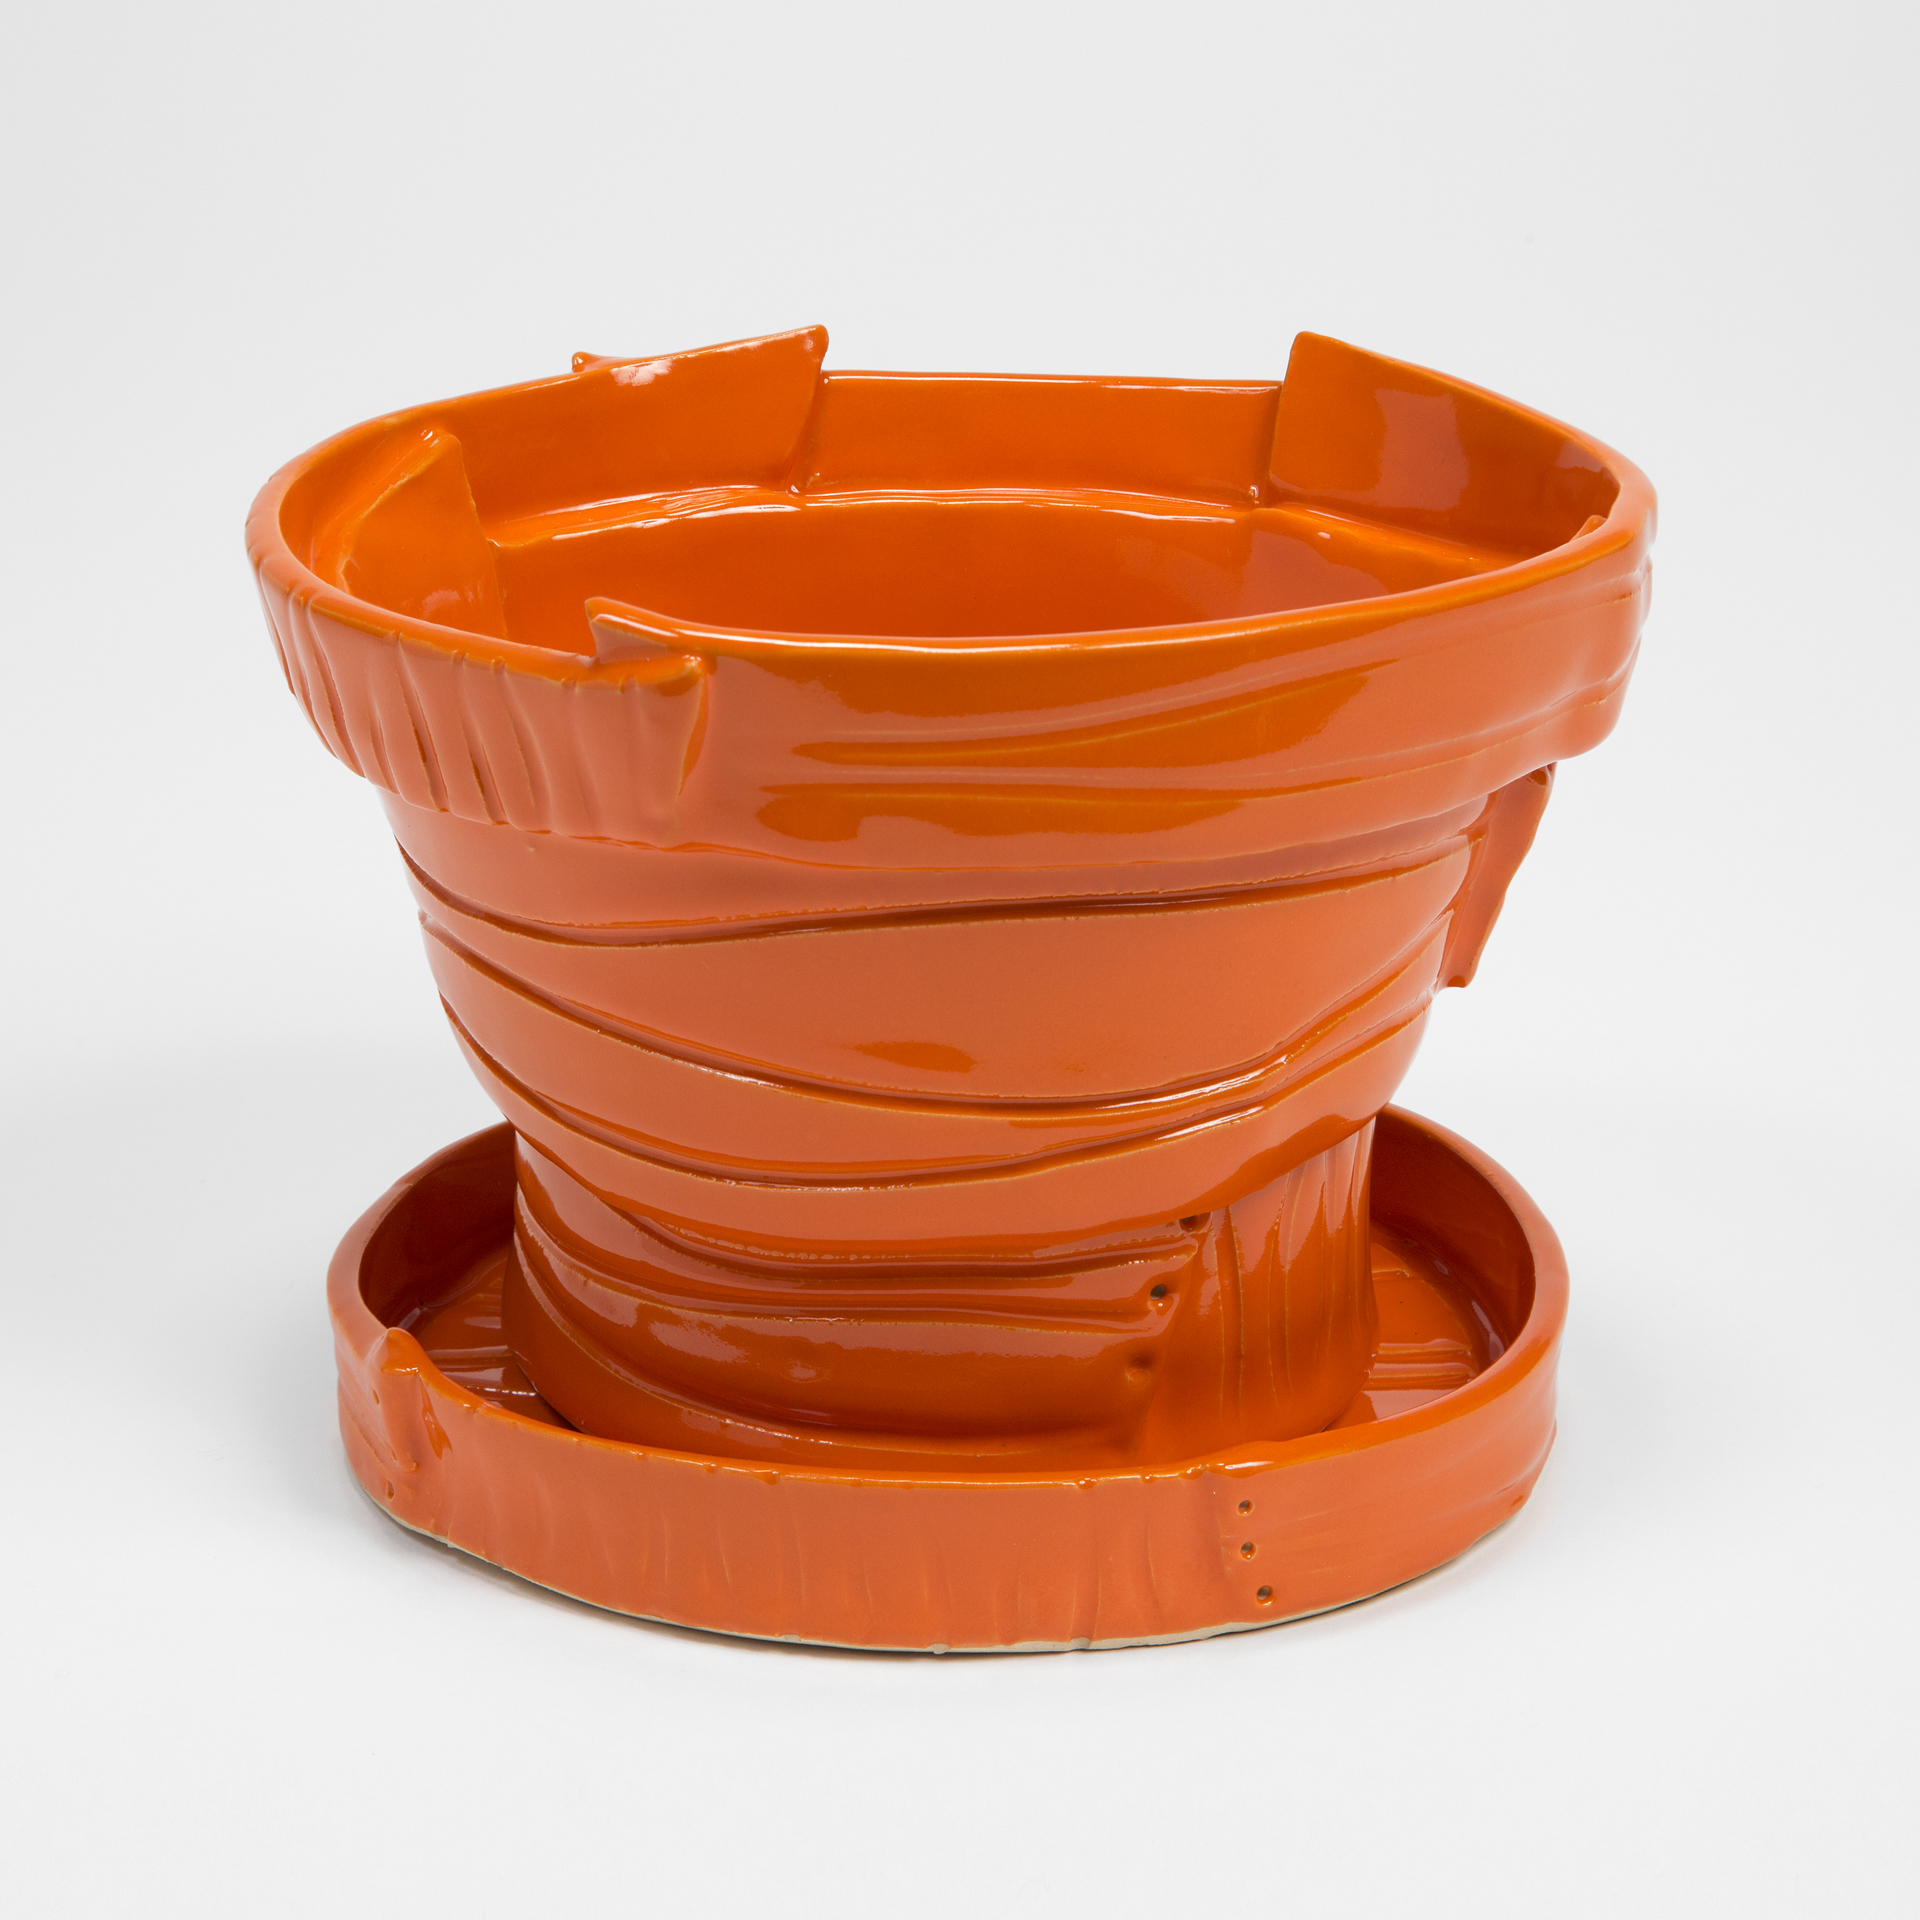 Orange Pot with Drainage Holes and Detached Tray